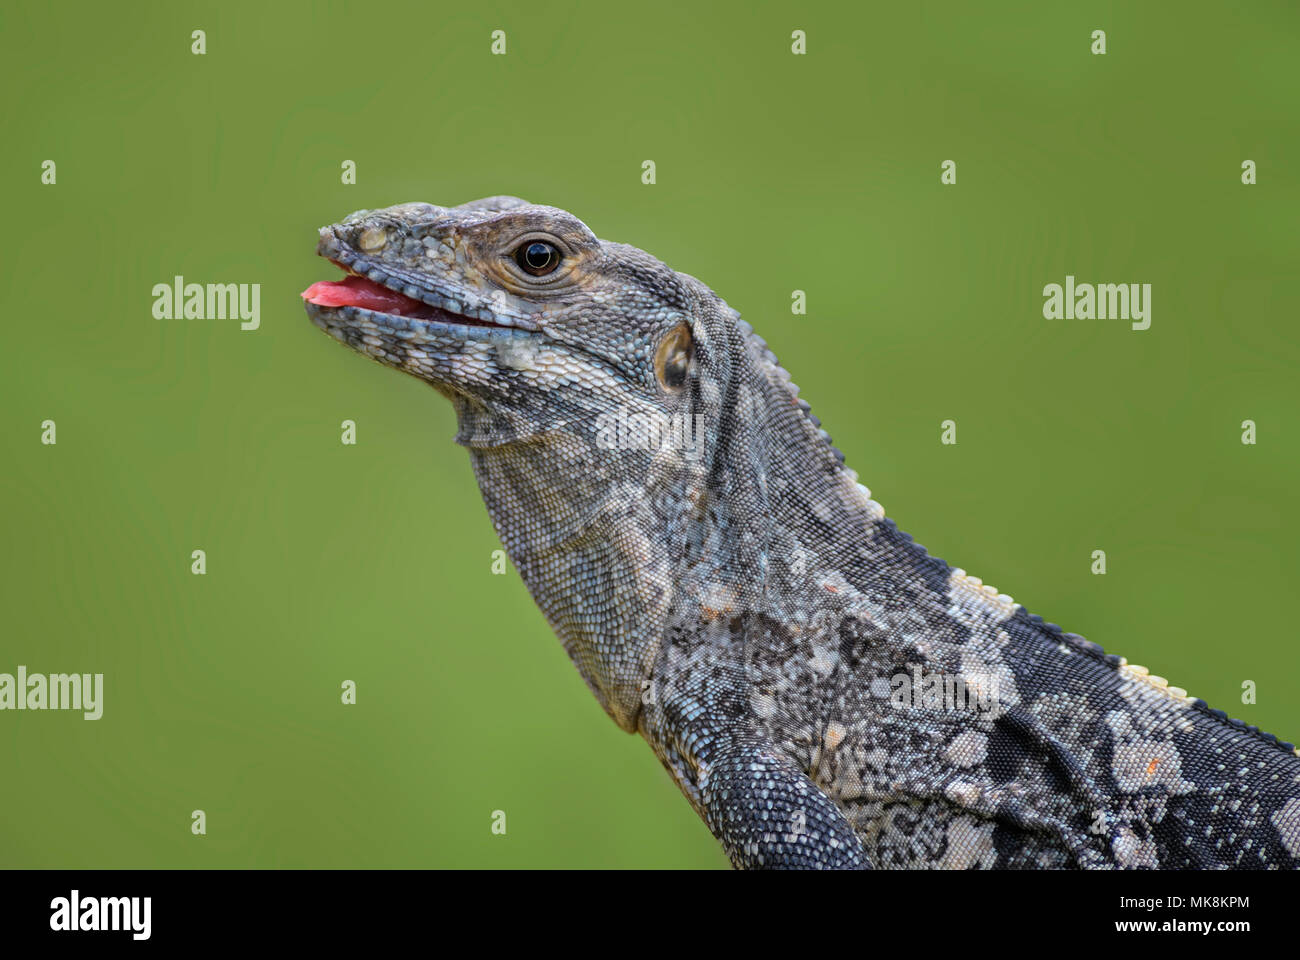 Black Spiny-tailed Iguana - Ctenosaura similis, large lizard from Central America forests, Costa Rica. Stock Photo